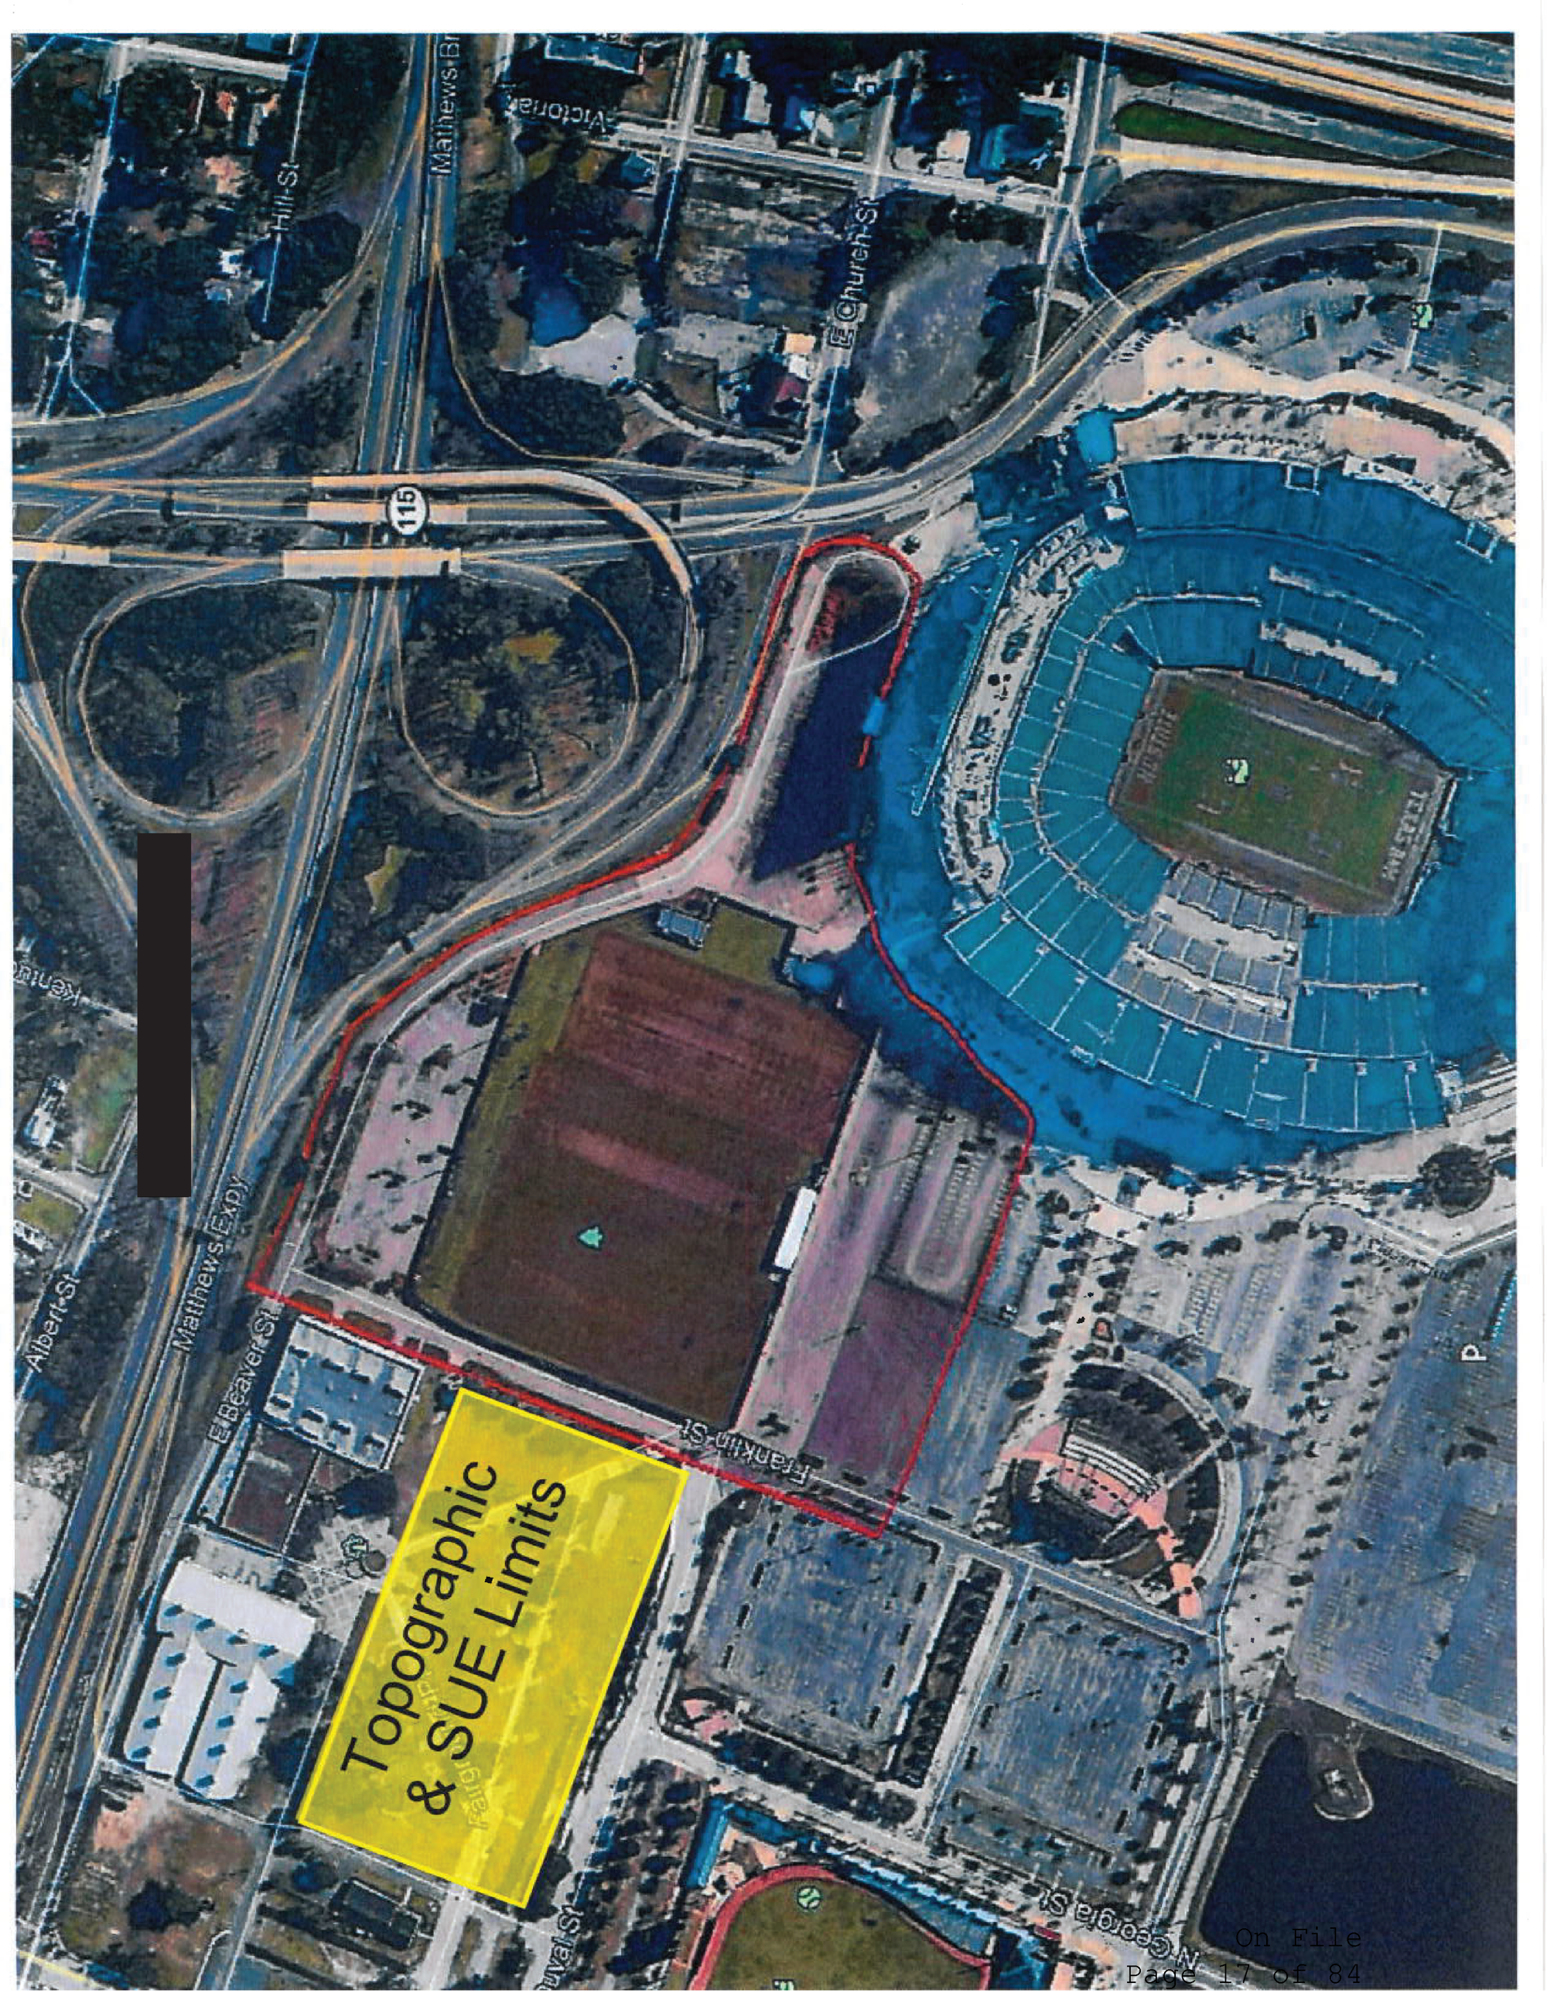 The football performance center will be at the northwest corner of TIAA Bank Field.